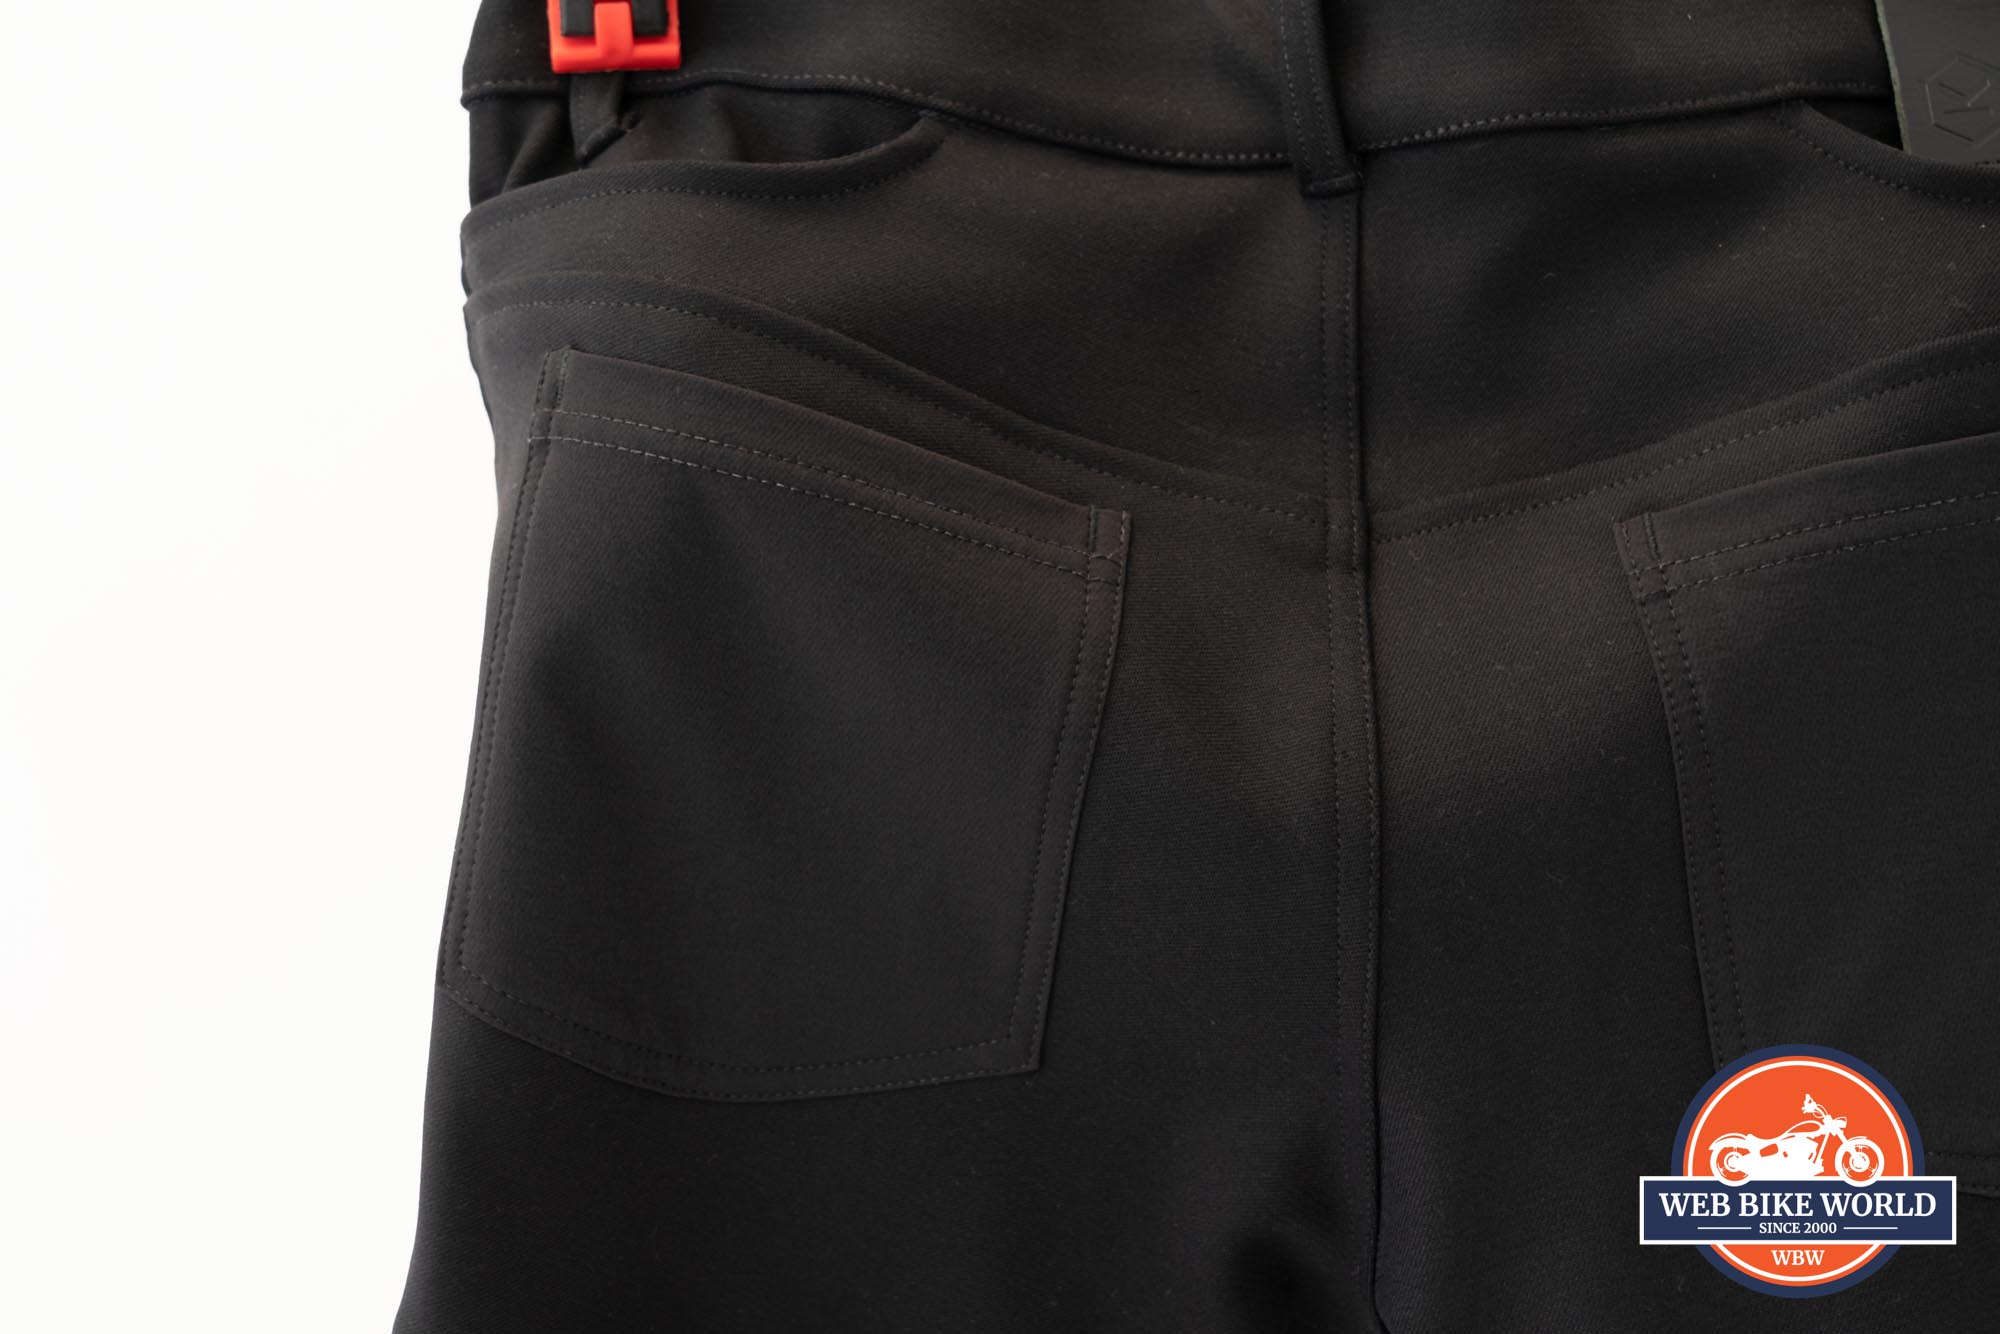 A view of the high tenacity nylon/spandex mix on the Knox Urbane Pro Trousers